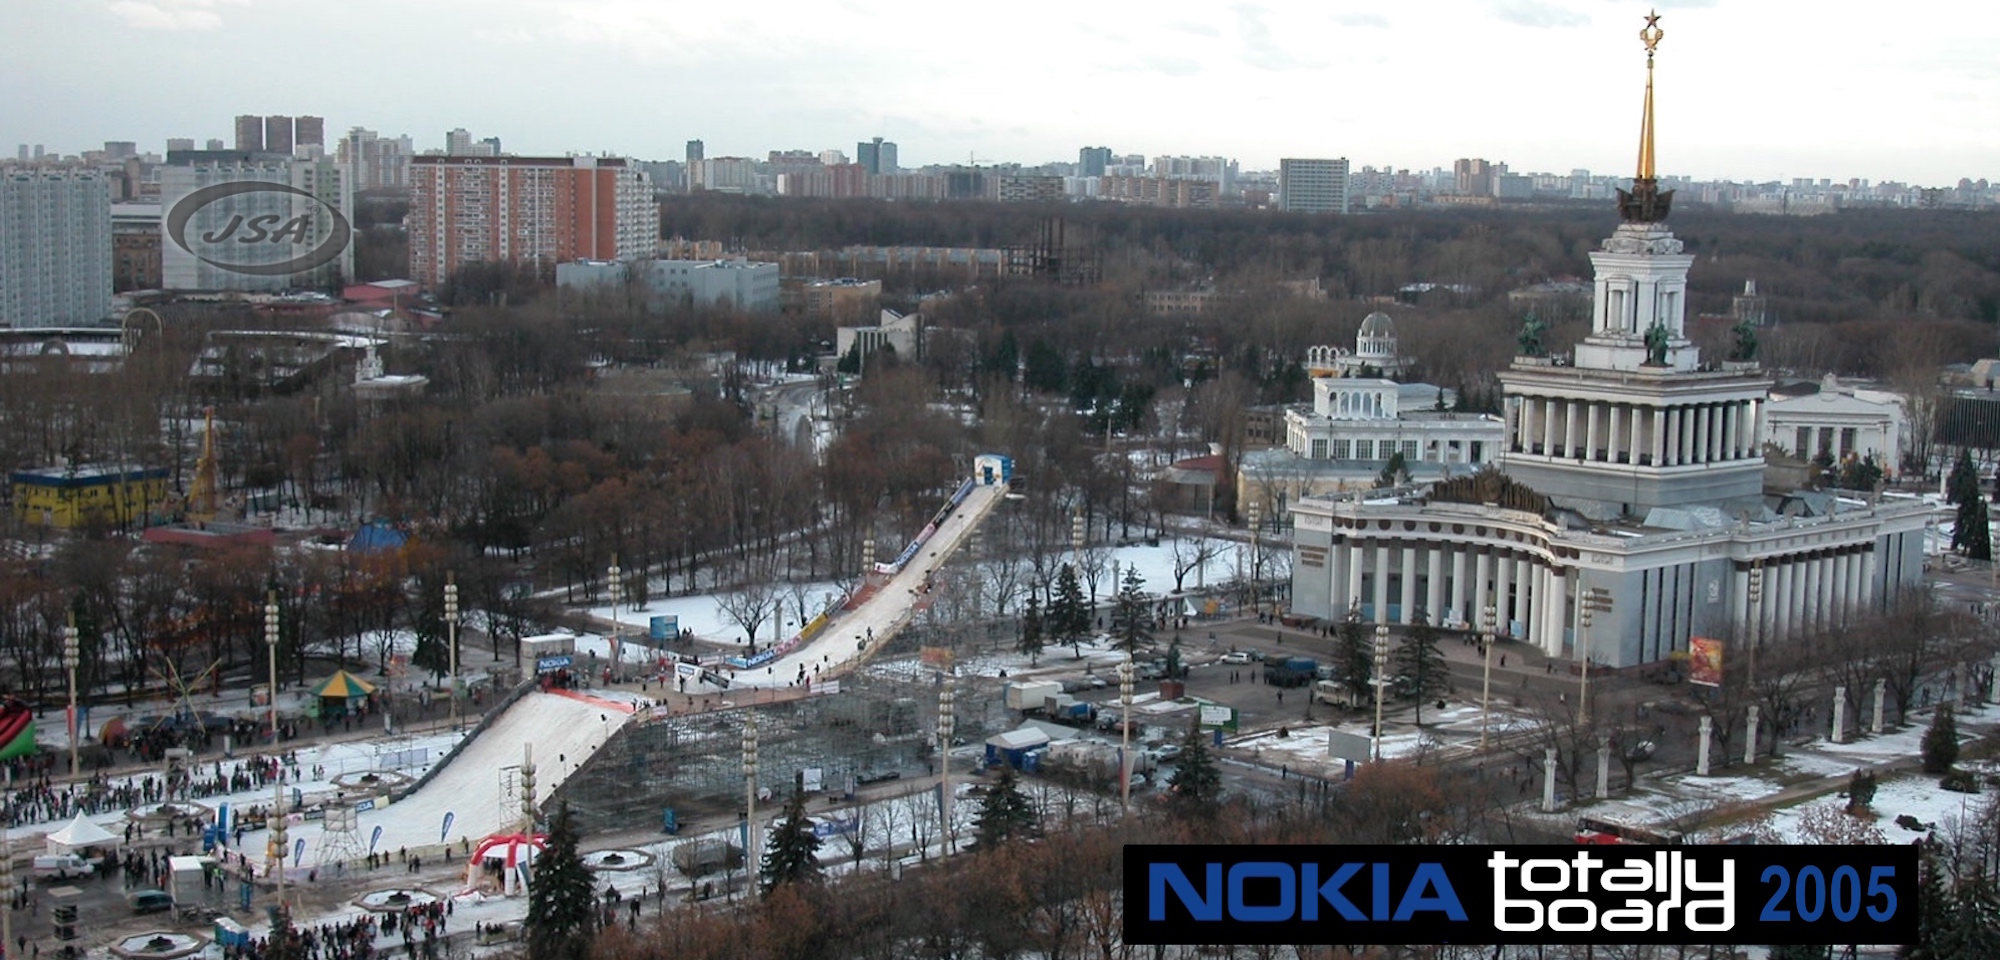 NOKIA Snowboard World Cup 2005. Air on the Ramp in Moscow – JSA STAGE COMPANY